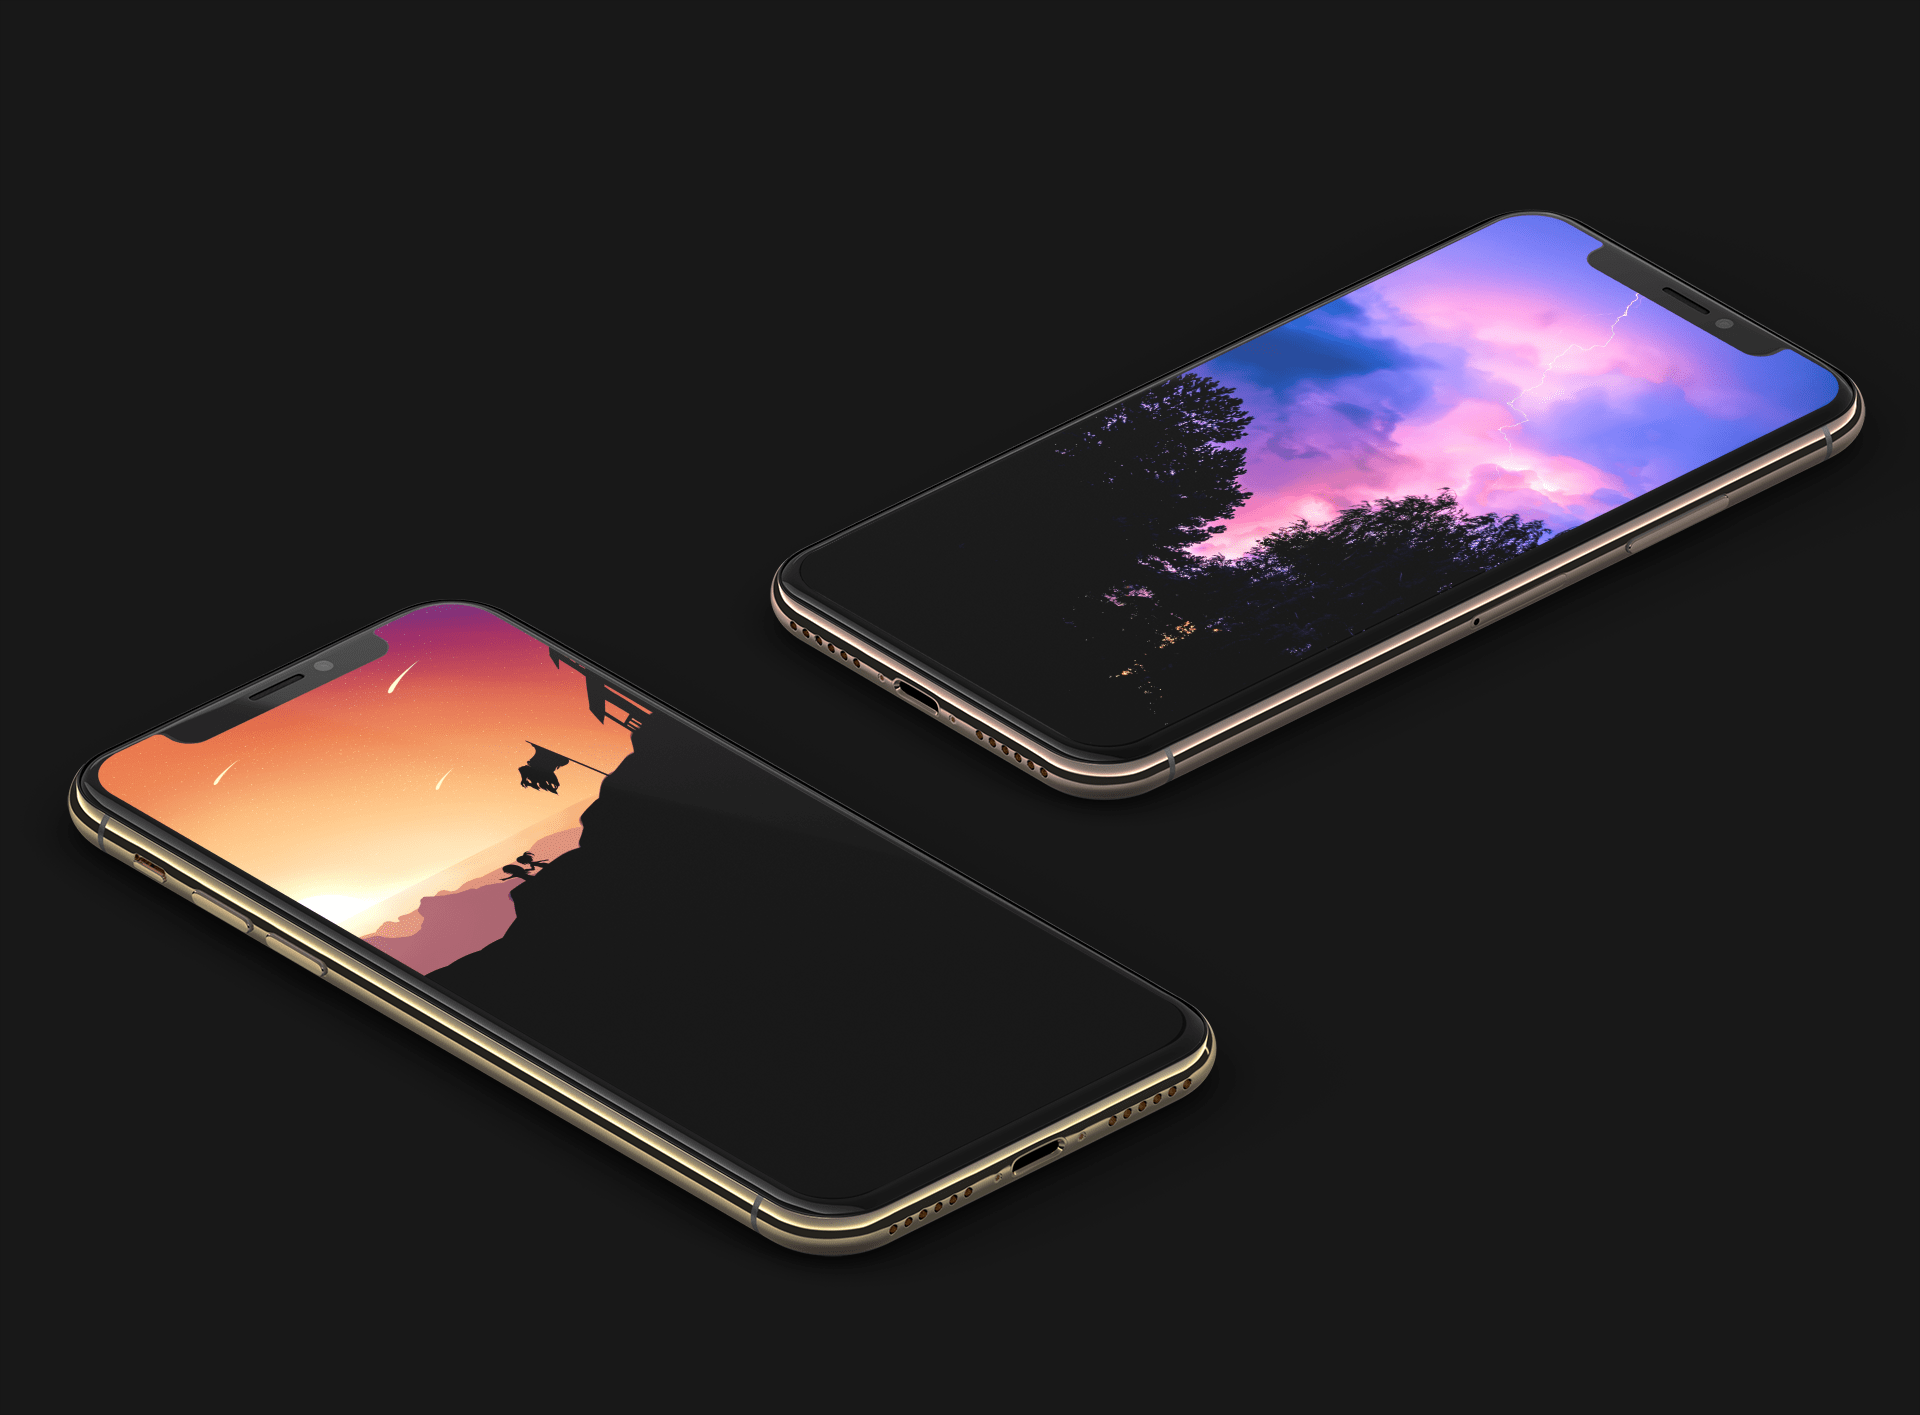 True black and OLED optimized wallpapers for iPhone XS